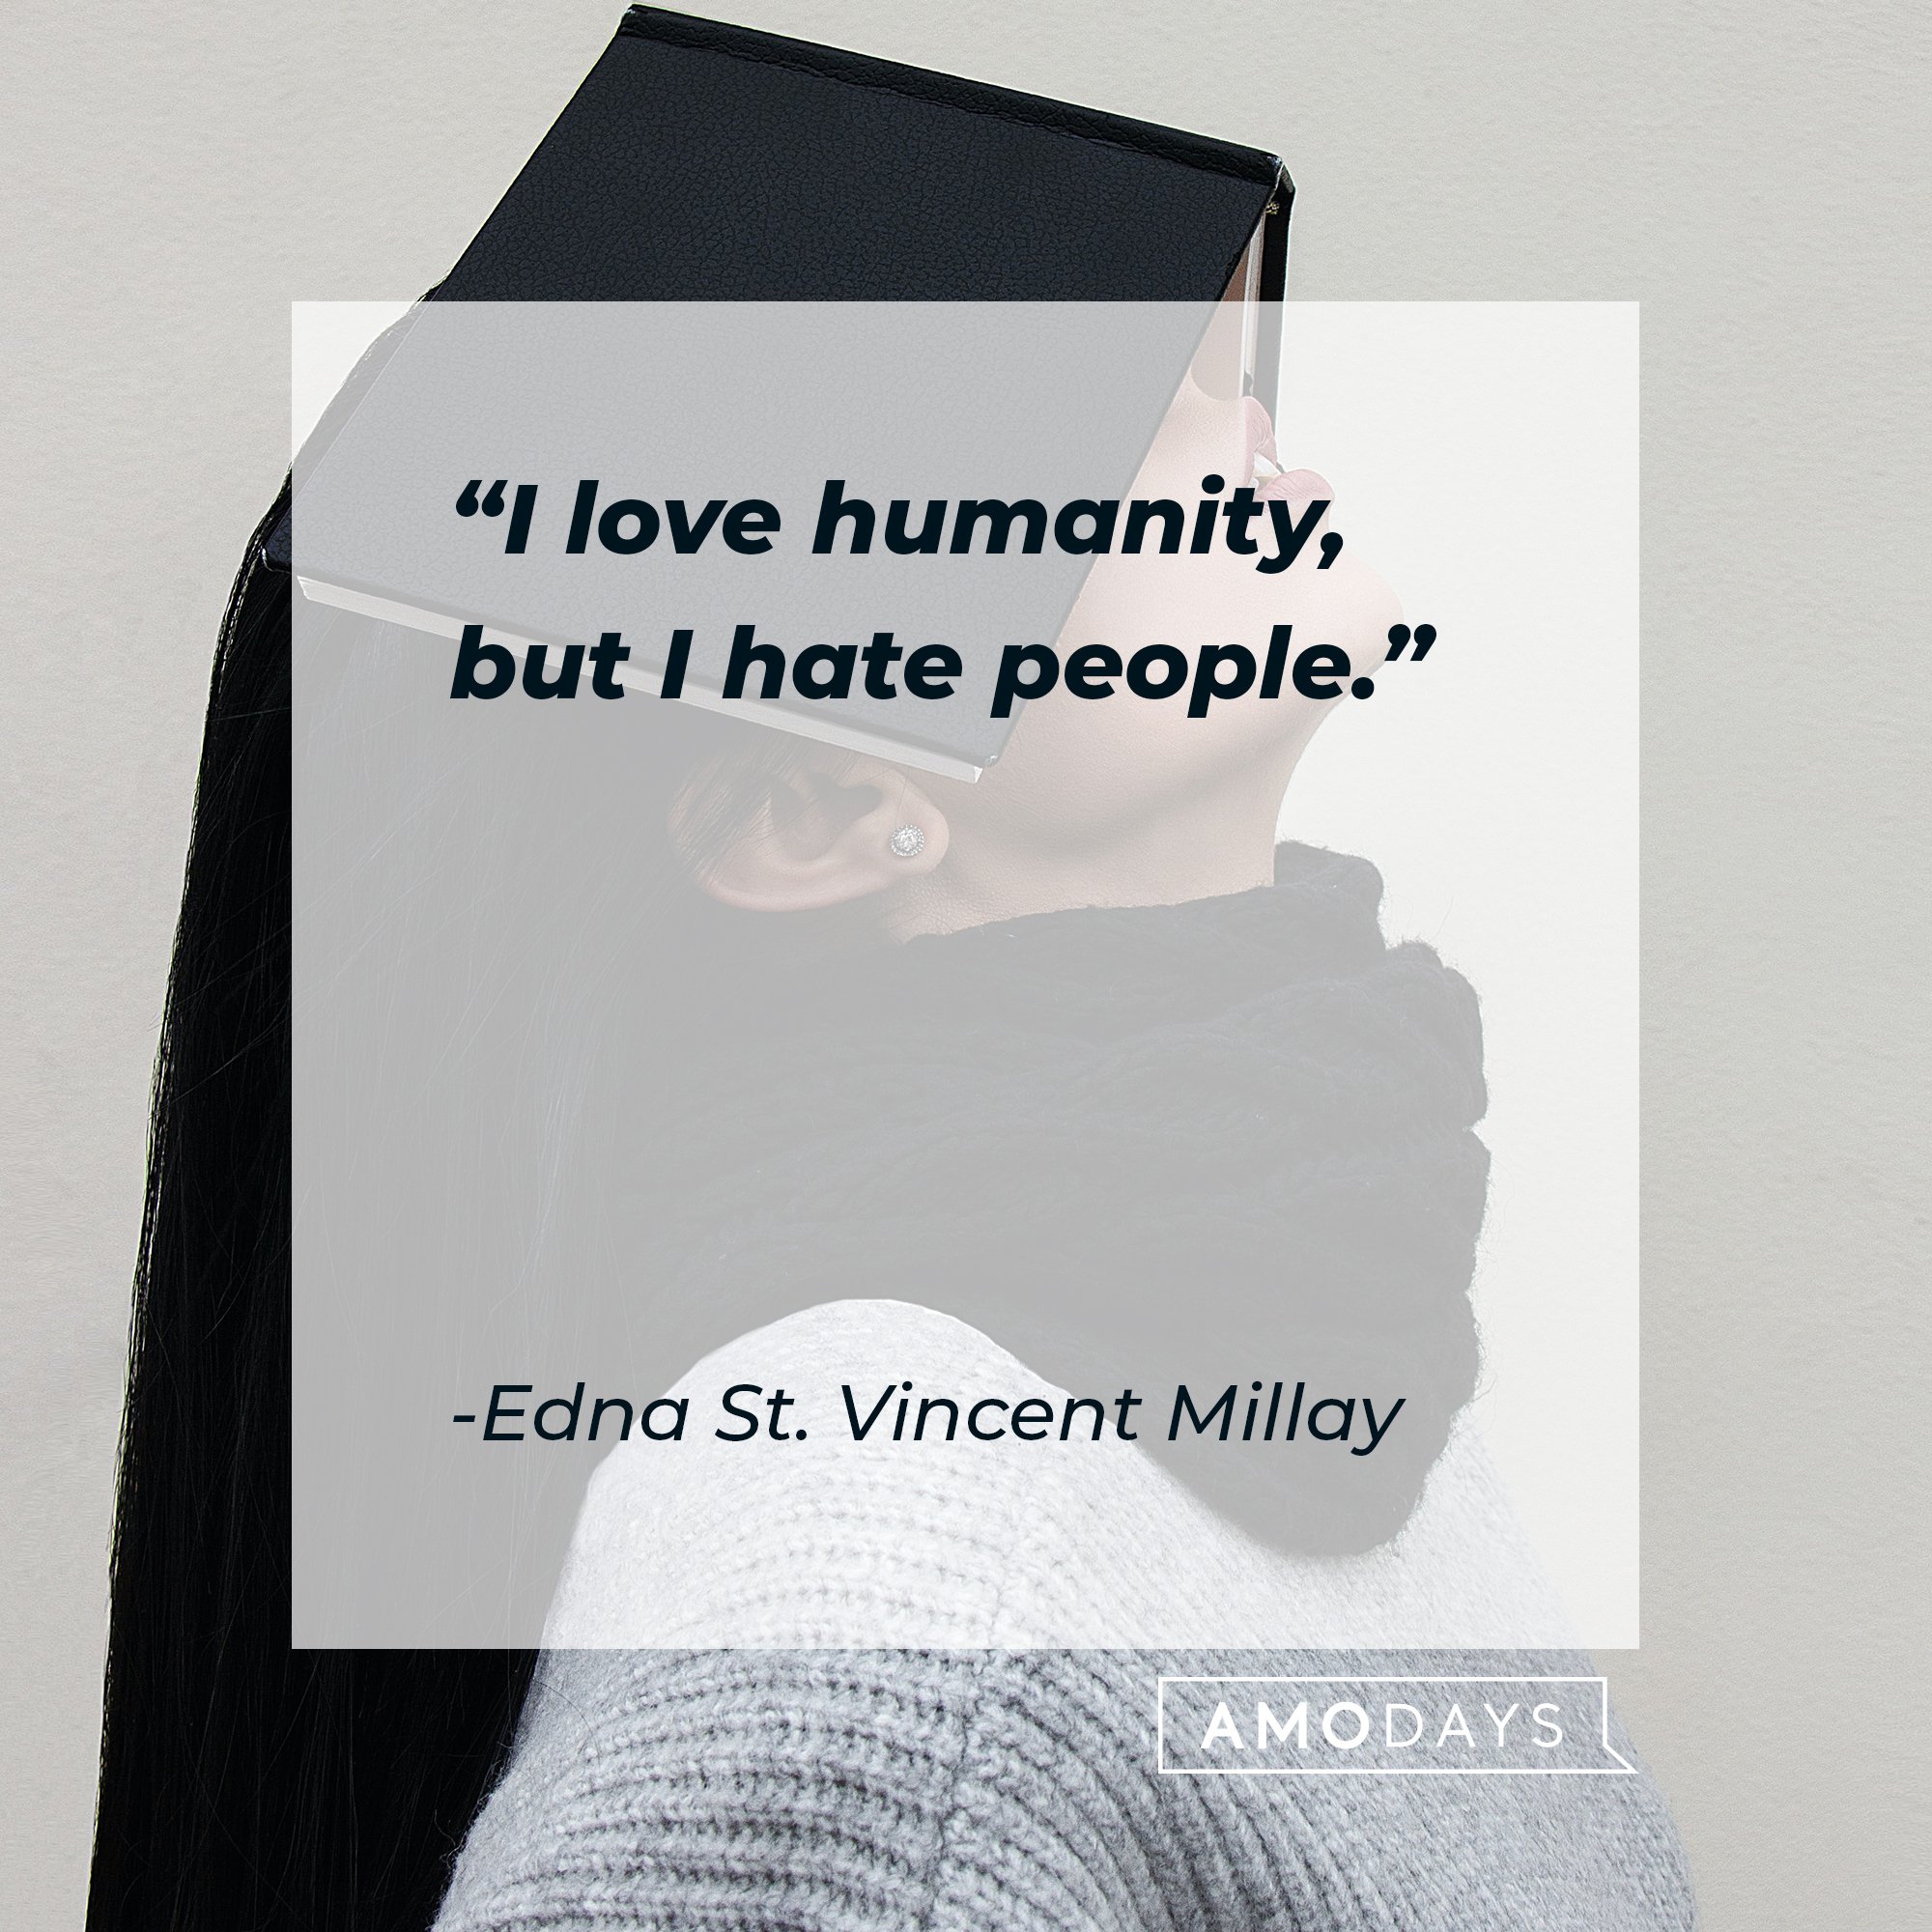 Edna St. Vincent Millay’s quote: "I love humanity, but I hate people." | Image: AmoDays 